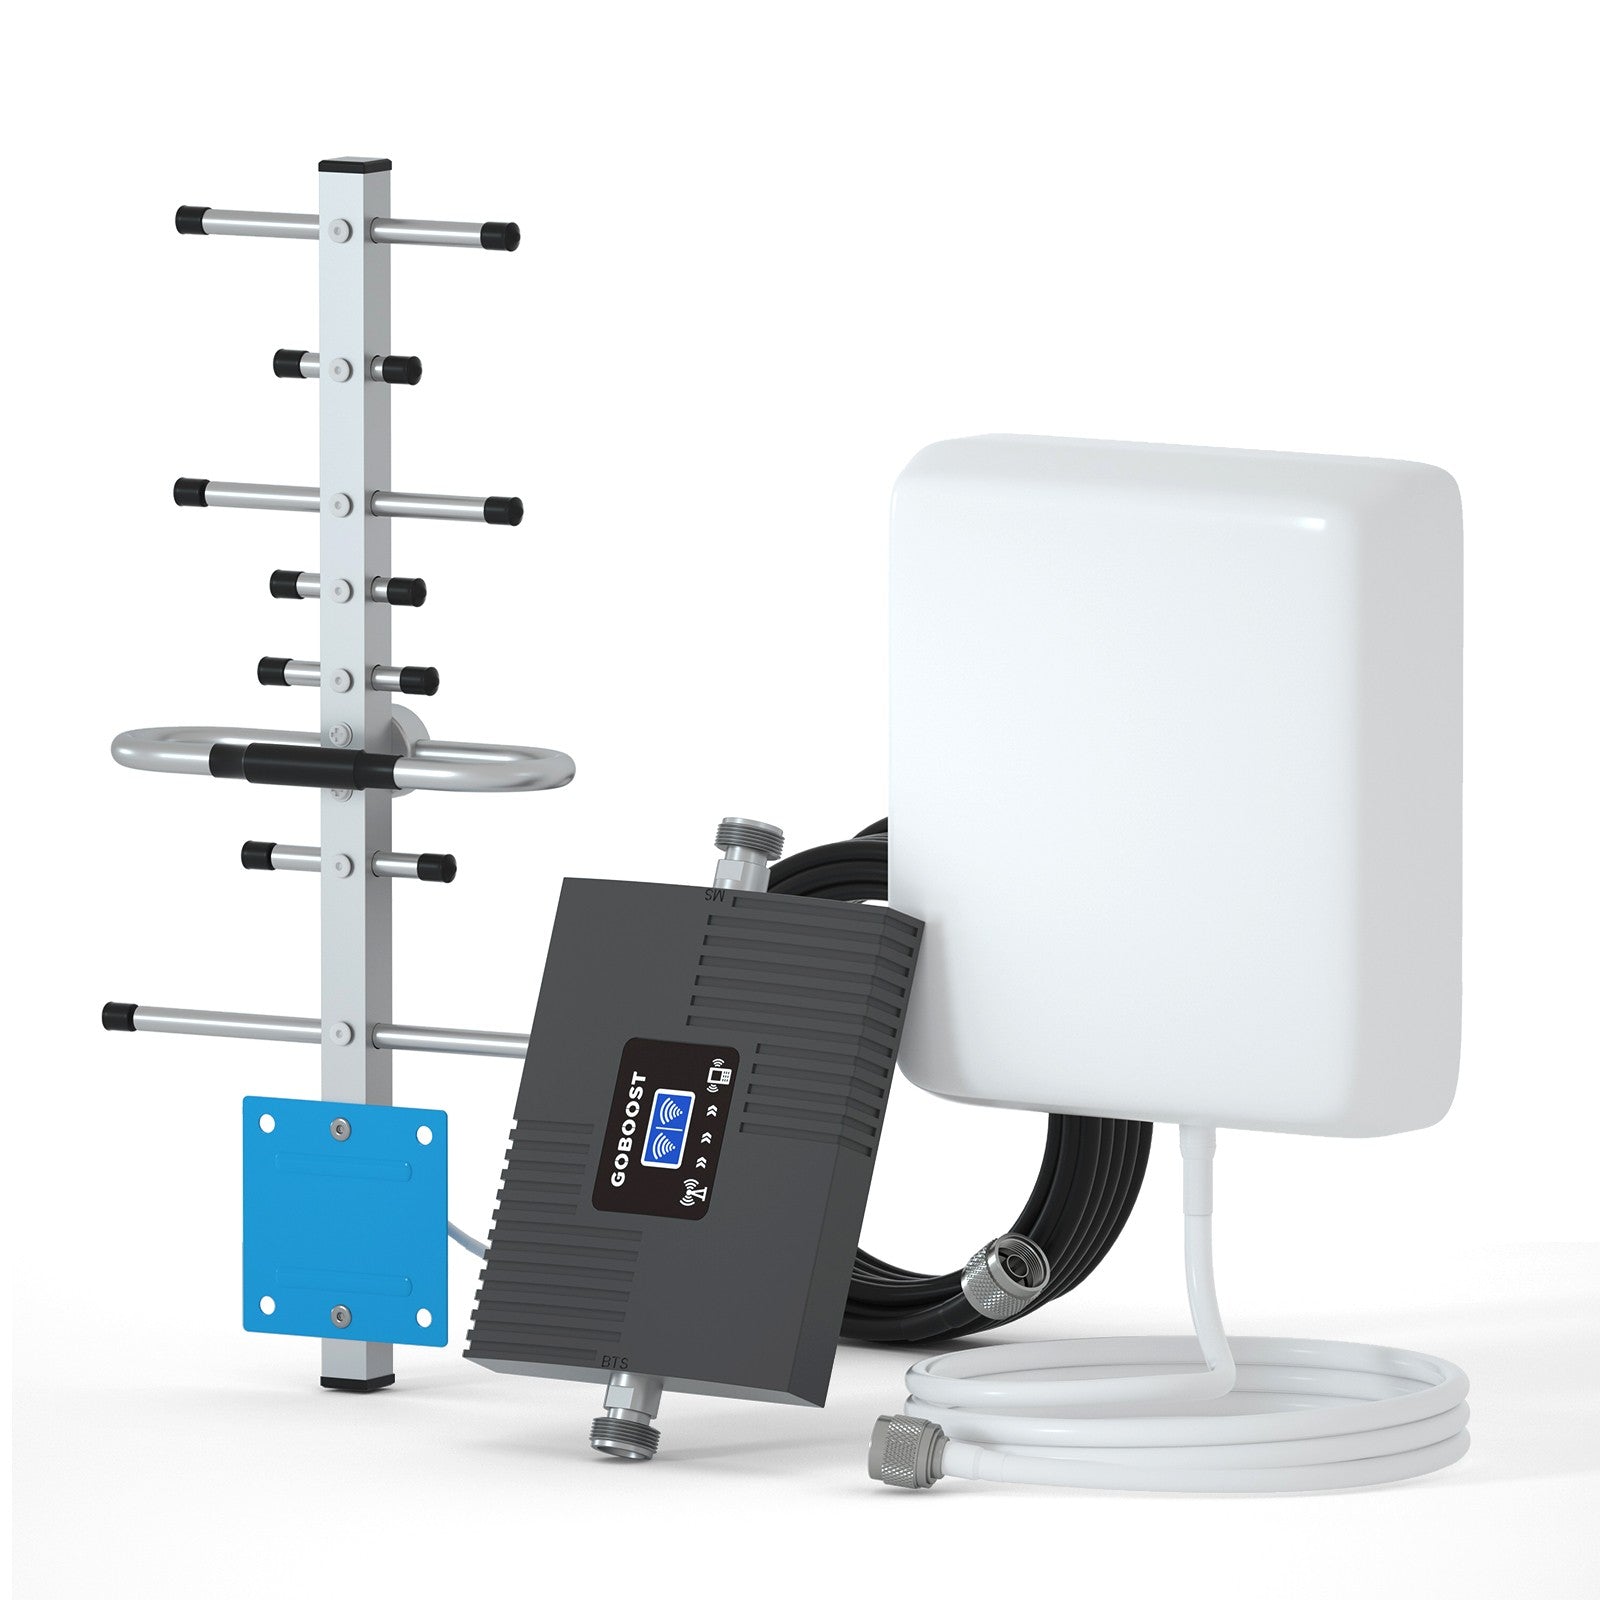 GOBOOST Cell Phone Signal Booster Band2&5 with Yagi Antenna